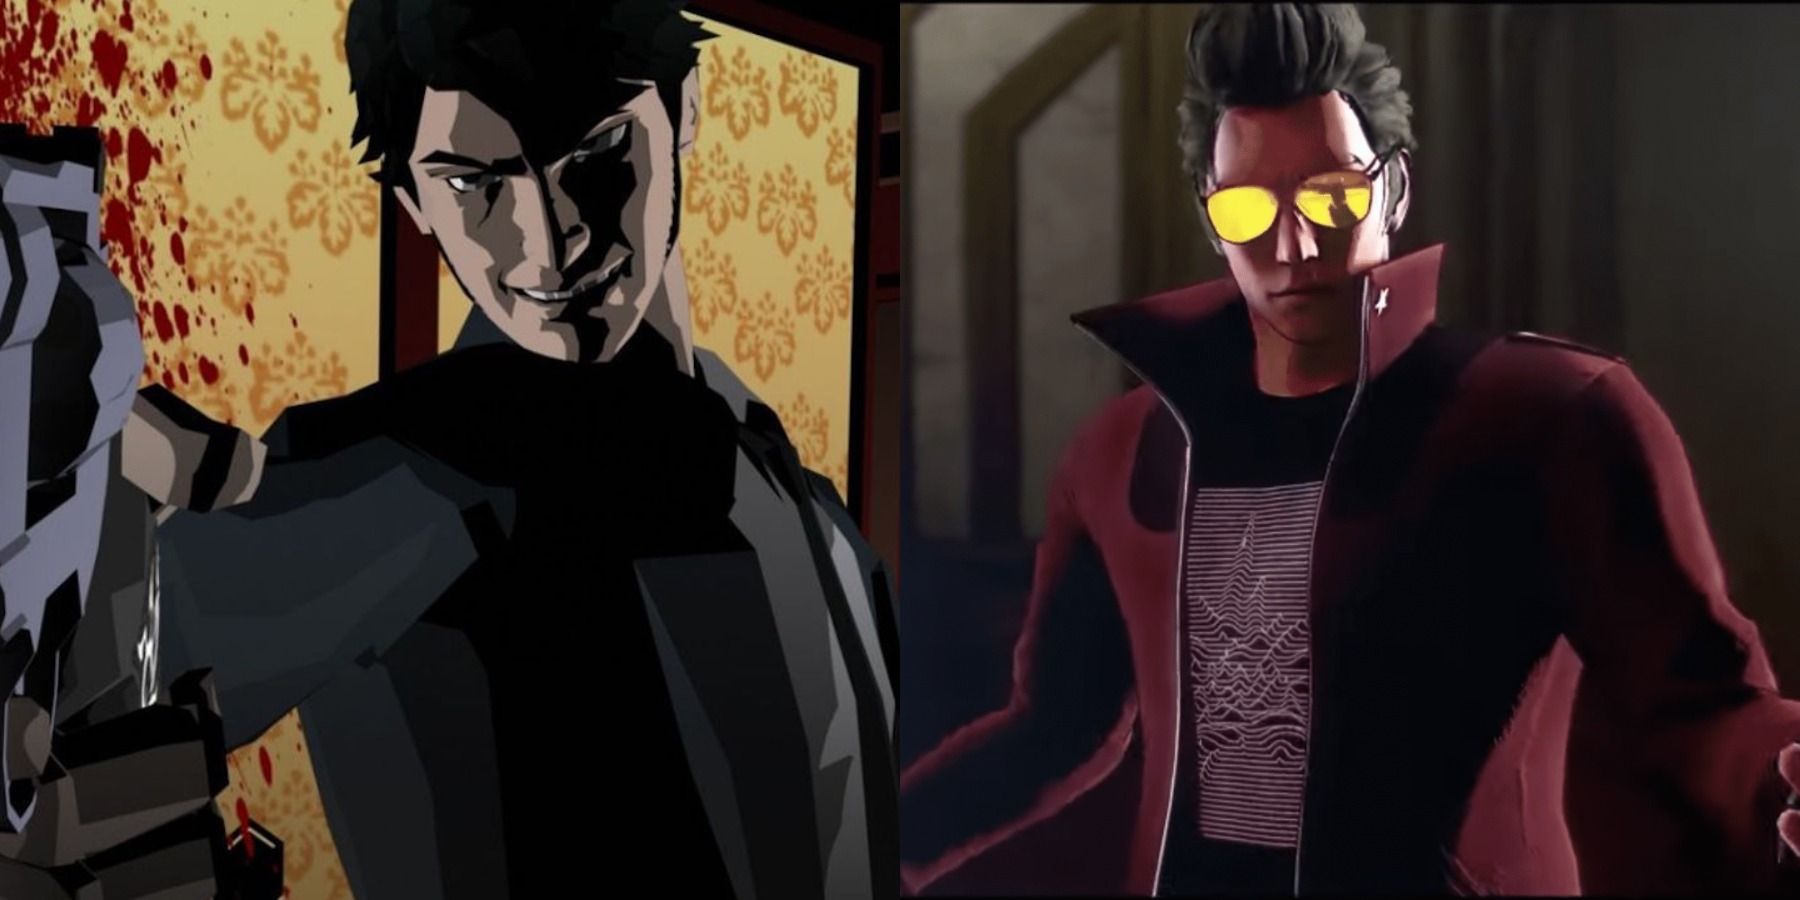 Killer7 and No More Heroes